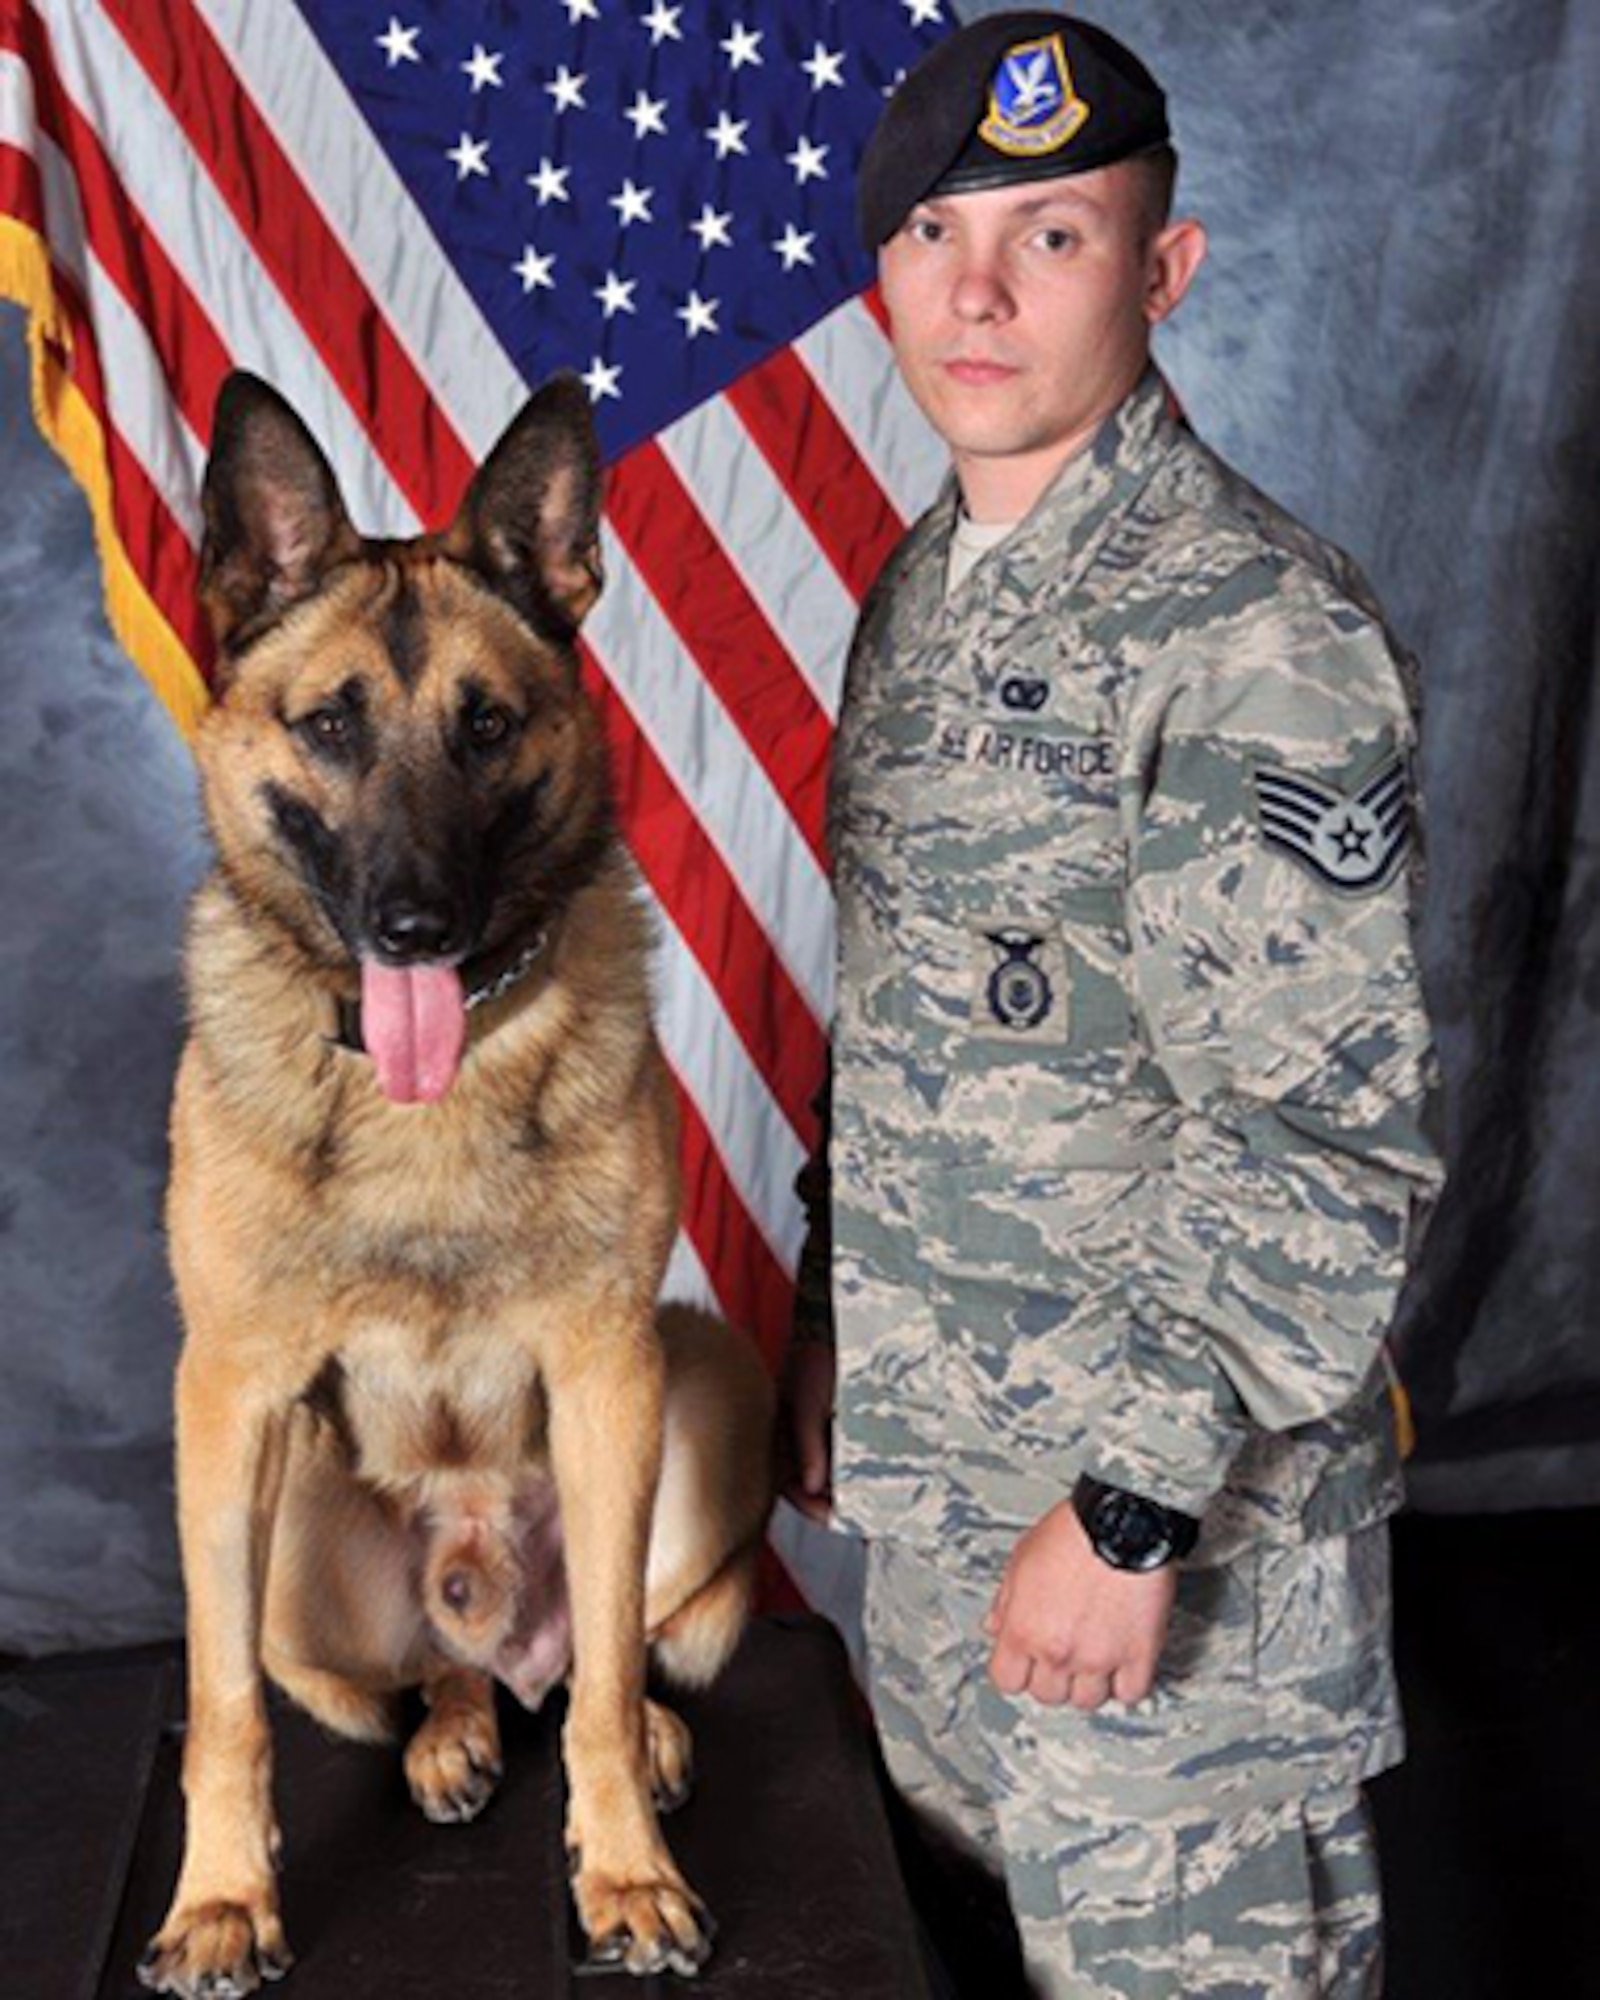 U.S. Air Force Staff Sgt. Tyler Sexton, 23d Security Forces Squadron military working dog handler, poses for an official photo with his partner, MWD Nido. Sexton and Nido share a close bond, allowing the team to pass certifications in only 8 days, a task that can take up to 90 days for less compatible teams. Their connection will play an important role as they deploy to Southwest Asia for a base security operations mission. (U.S. Air Force courtesy photo)